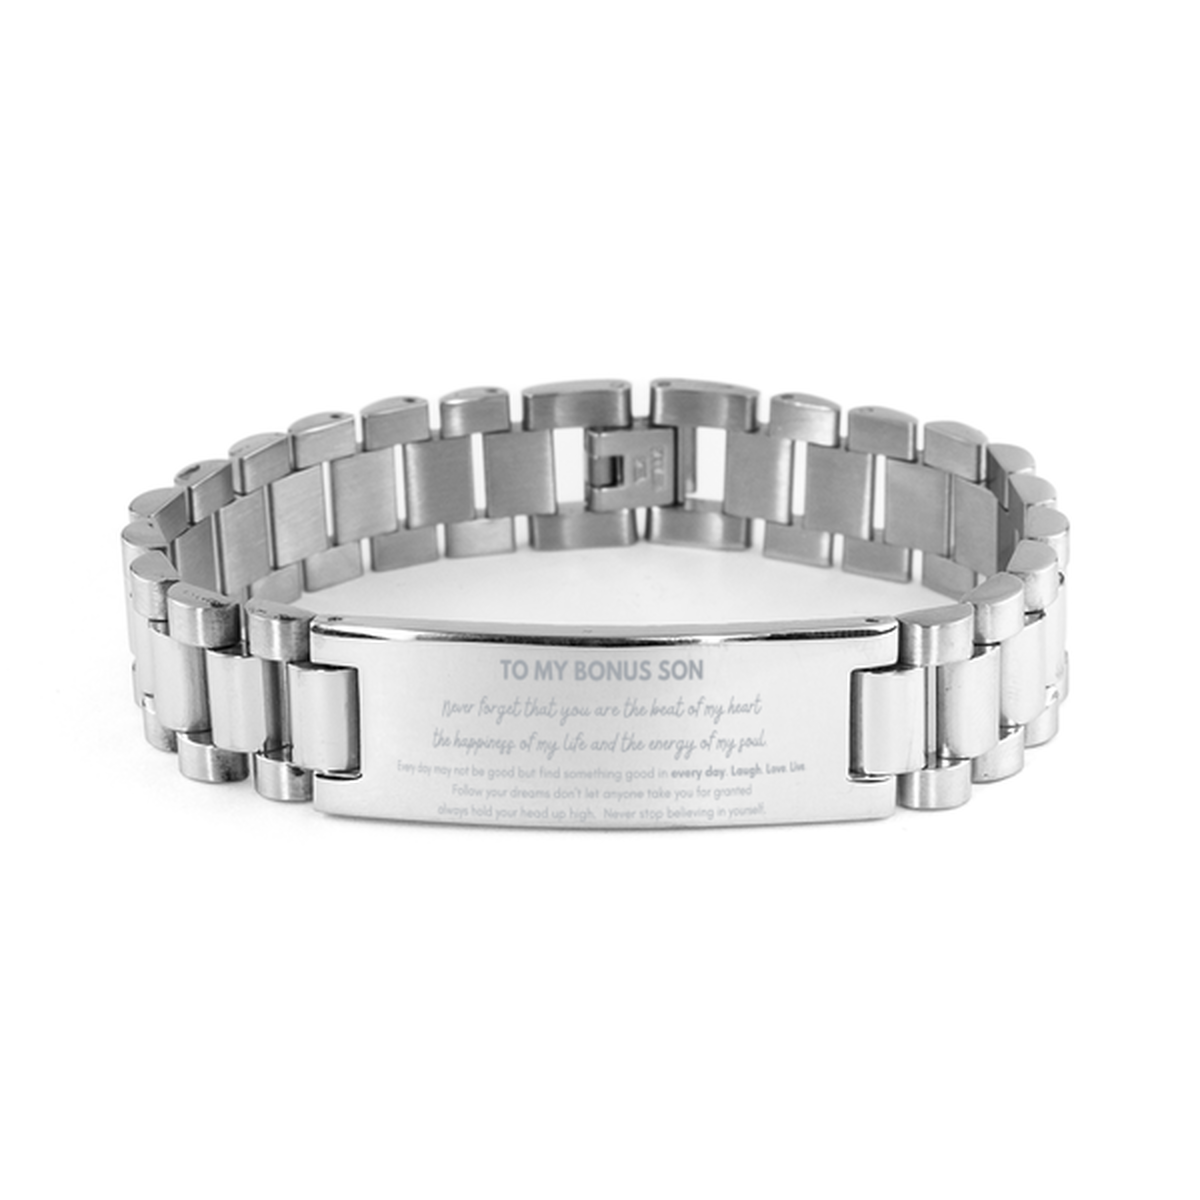 To My Bonus Son Bracelet Gifts, Christmas Bonus Son Ladder Stainless Steel Bracelet Present, Birthday Unique Motivational For Bonus Son, To My Bonus Son Never forget that you are the beat of my heart the happiness of my life and the energy of my soul